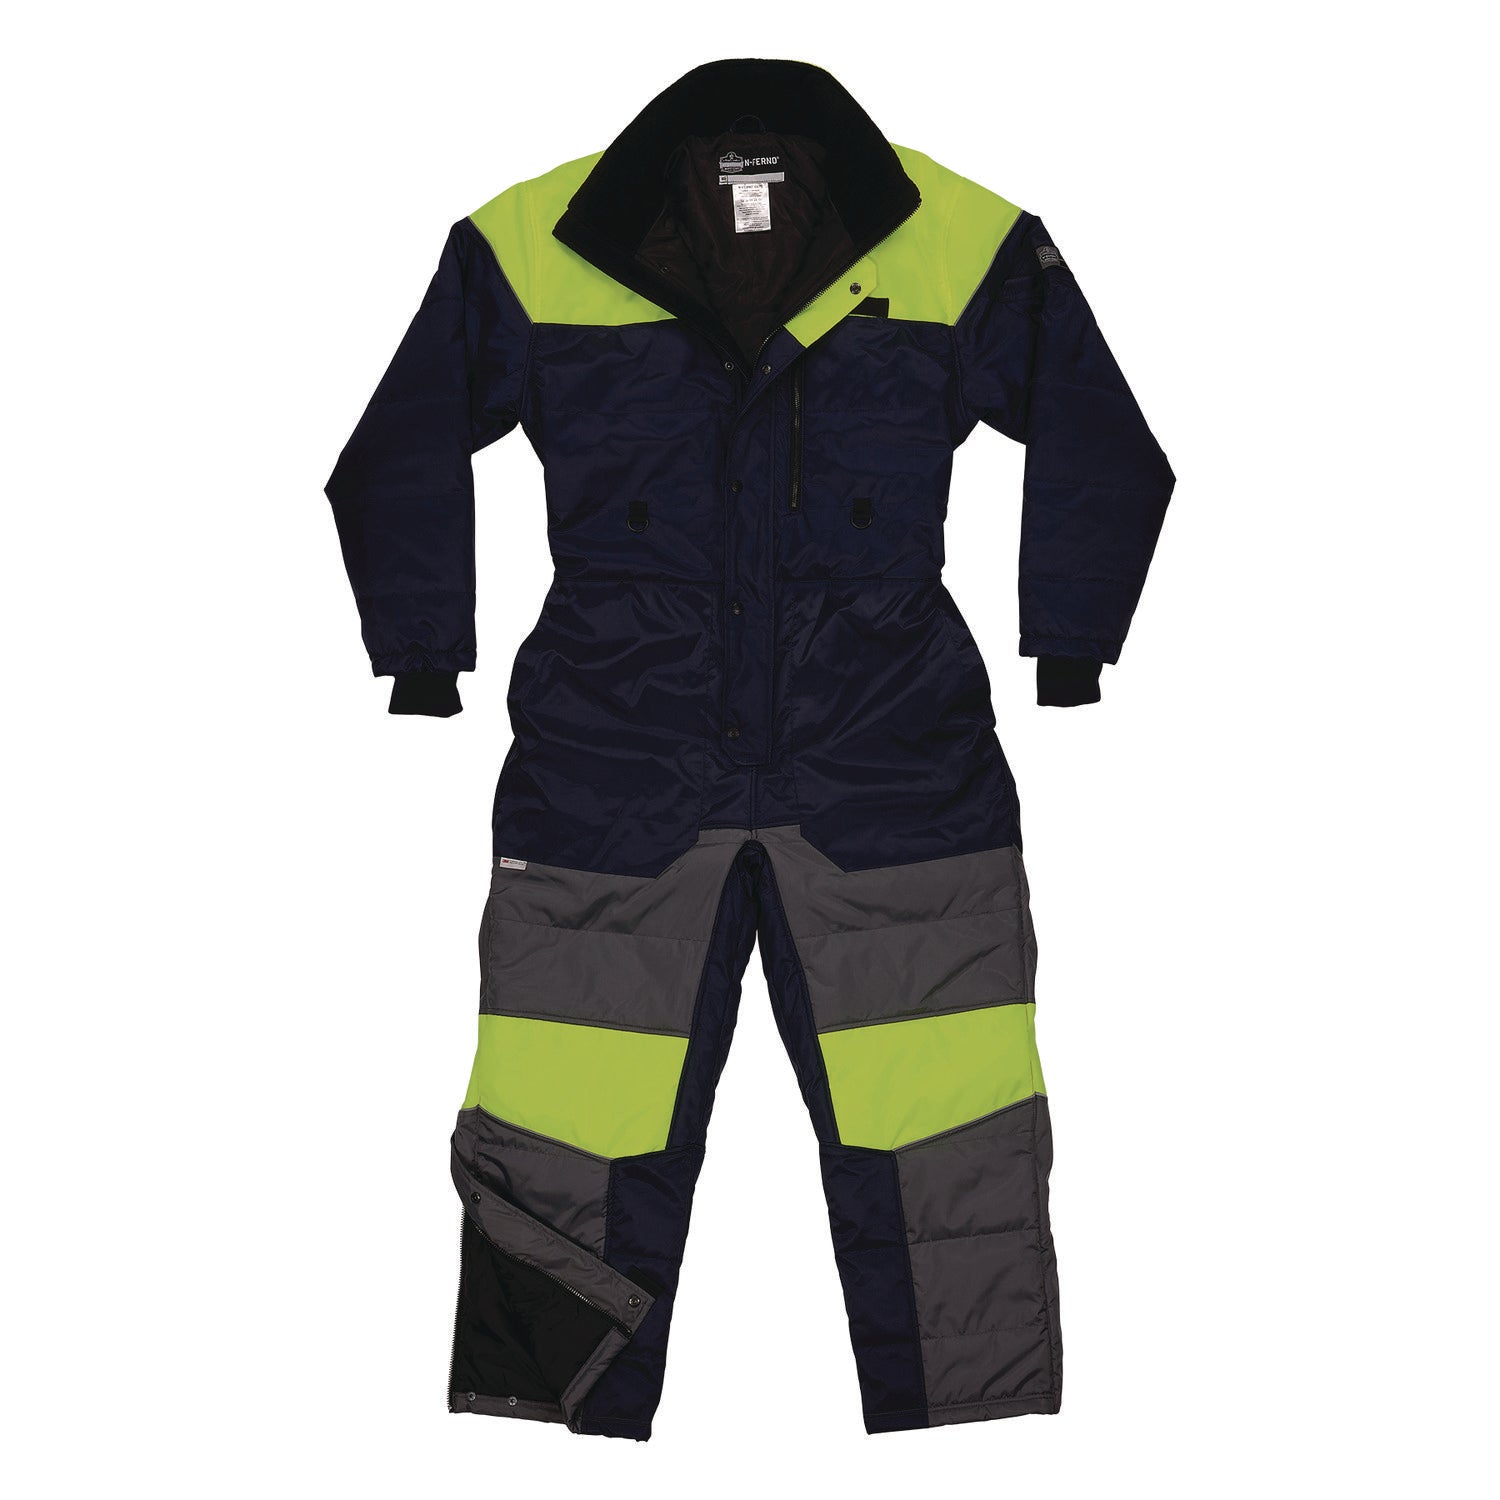 n-ferno-6475-insulated-freezer-coverall-3x-large-navy-ships-in-1-3-business-days_ego41247 - 1